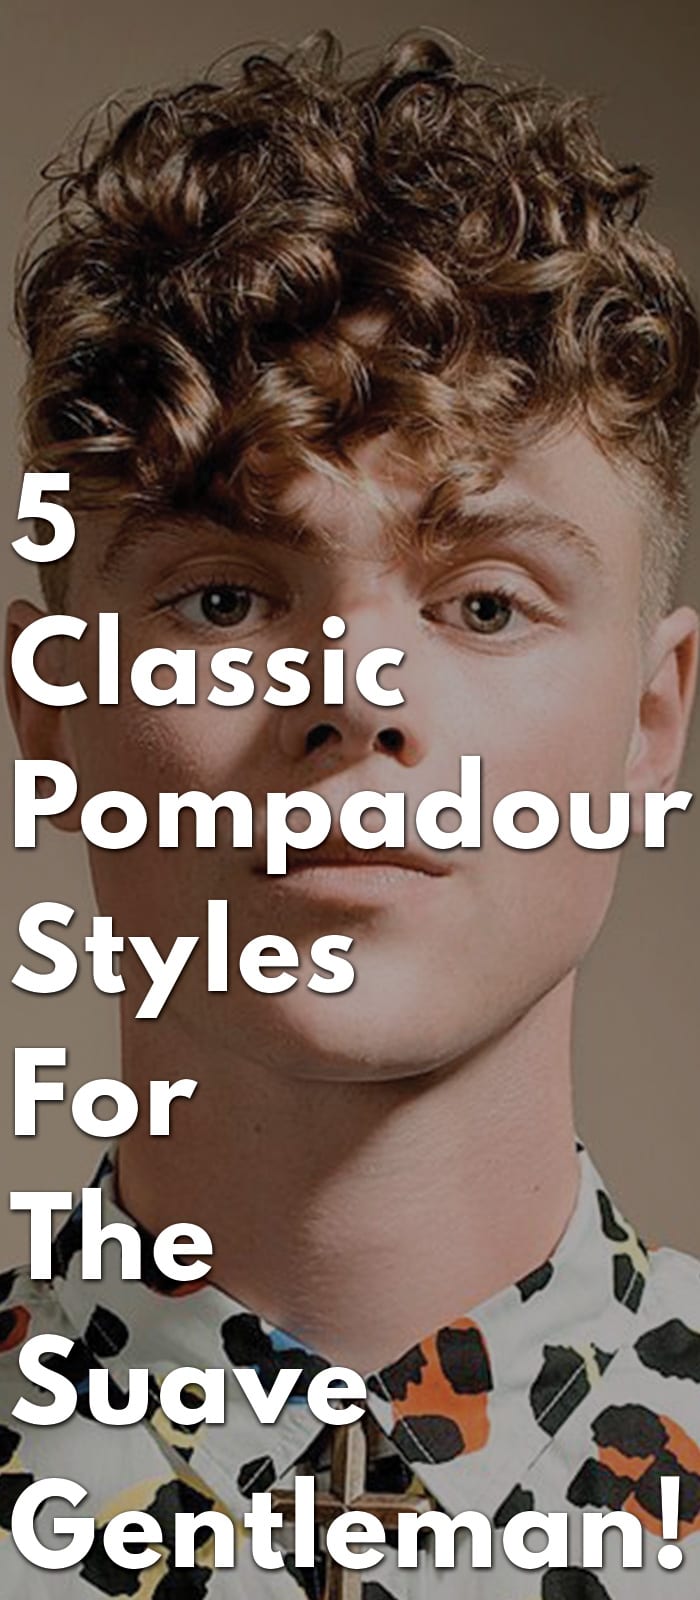 5-Classic-Pompadour-Styles-For-The-Suave-Gentleman!